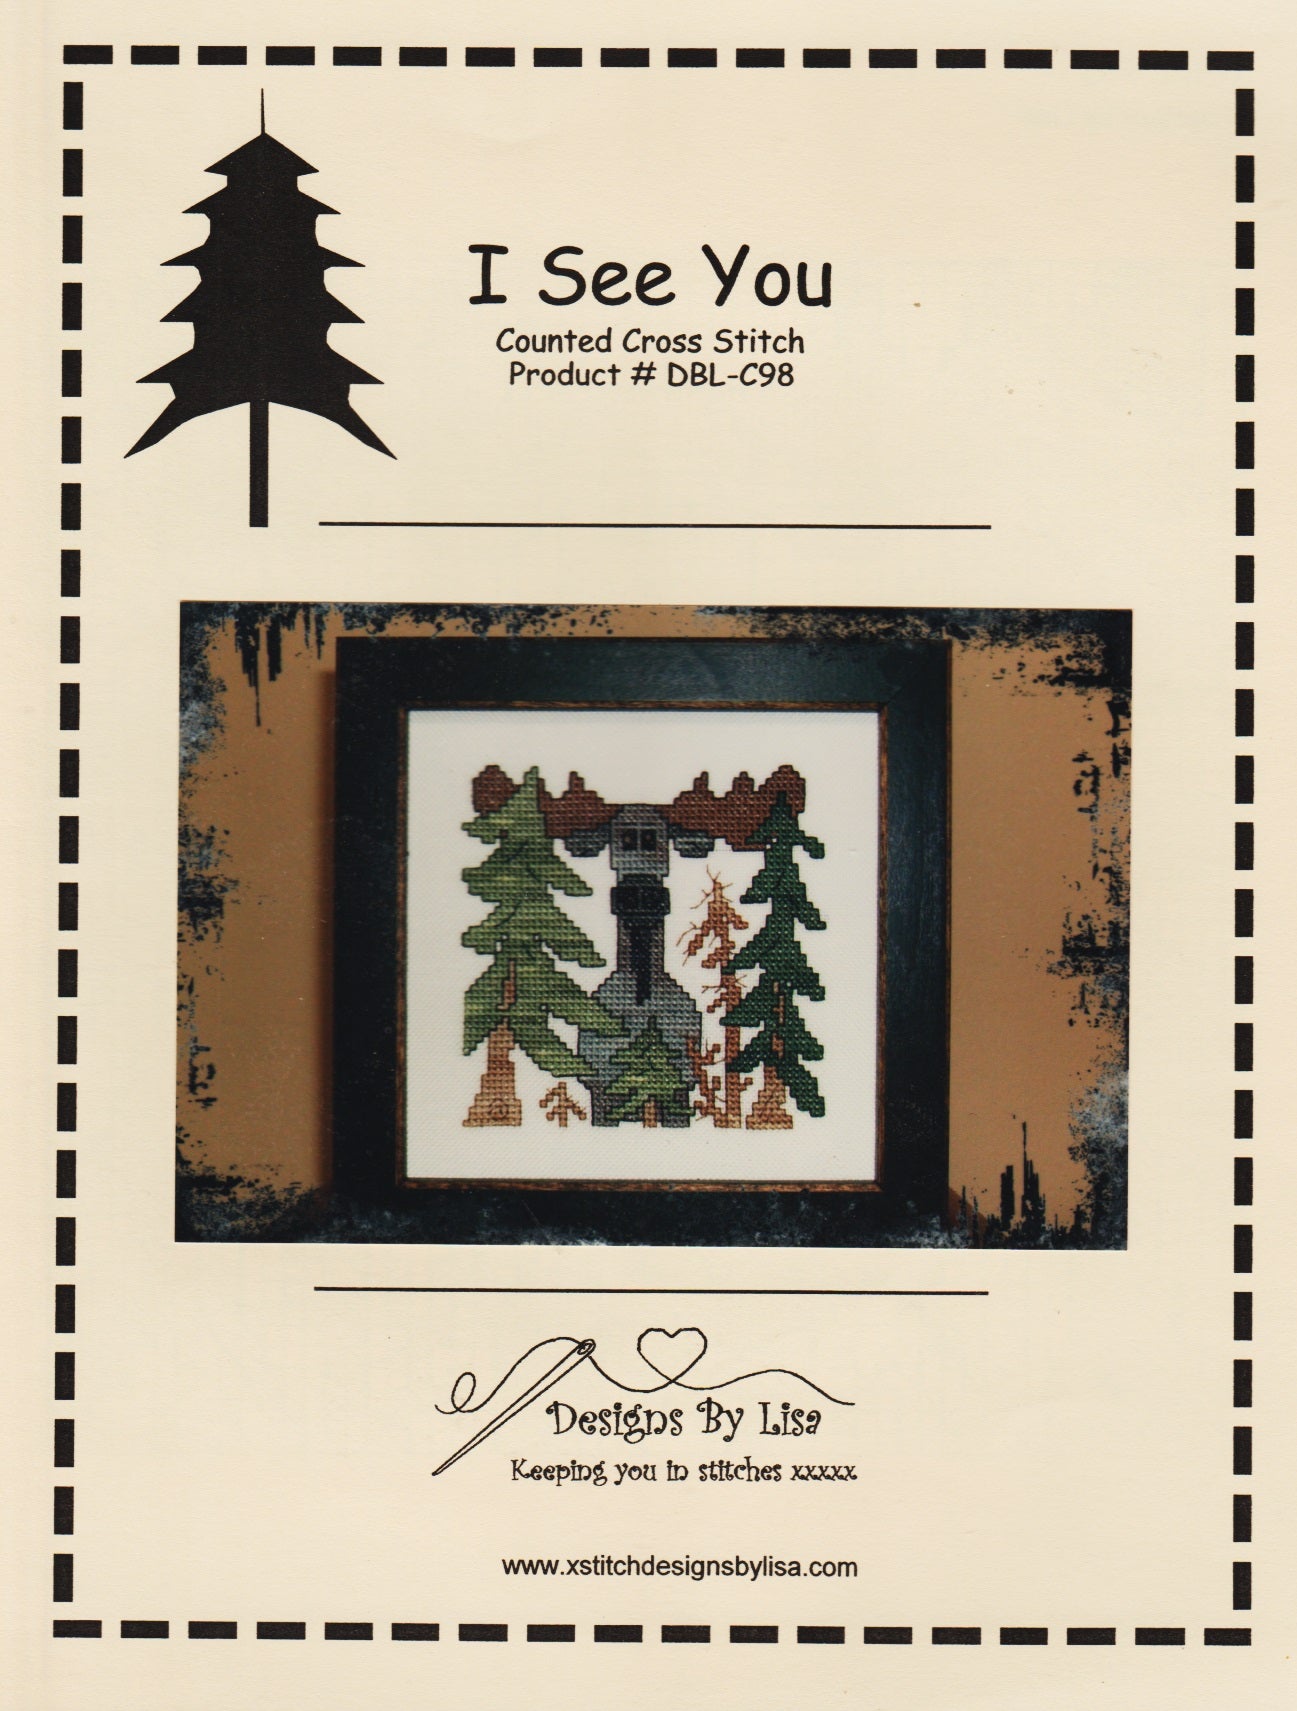 Designs By Lisa I See You DBL-C98 cross stitch pattern